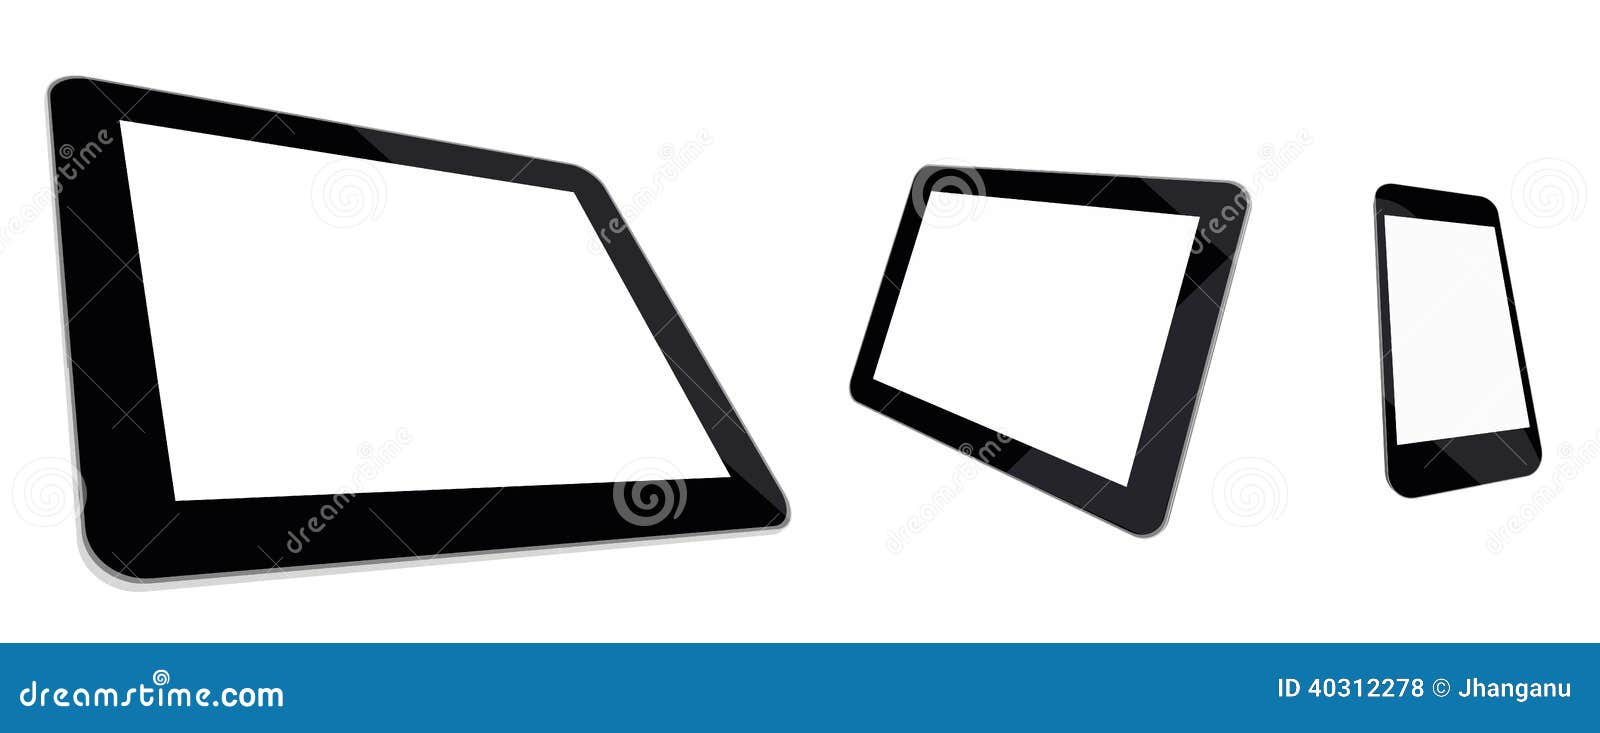 tablet computer, mini tablet and smartphone blank